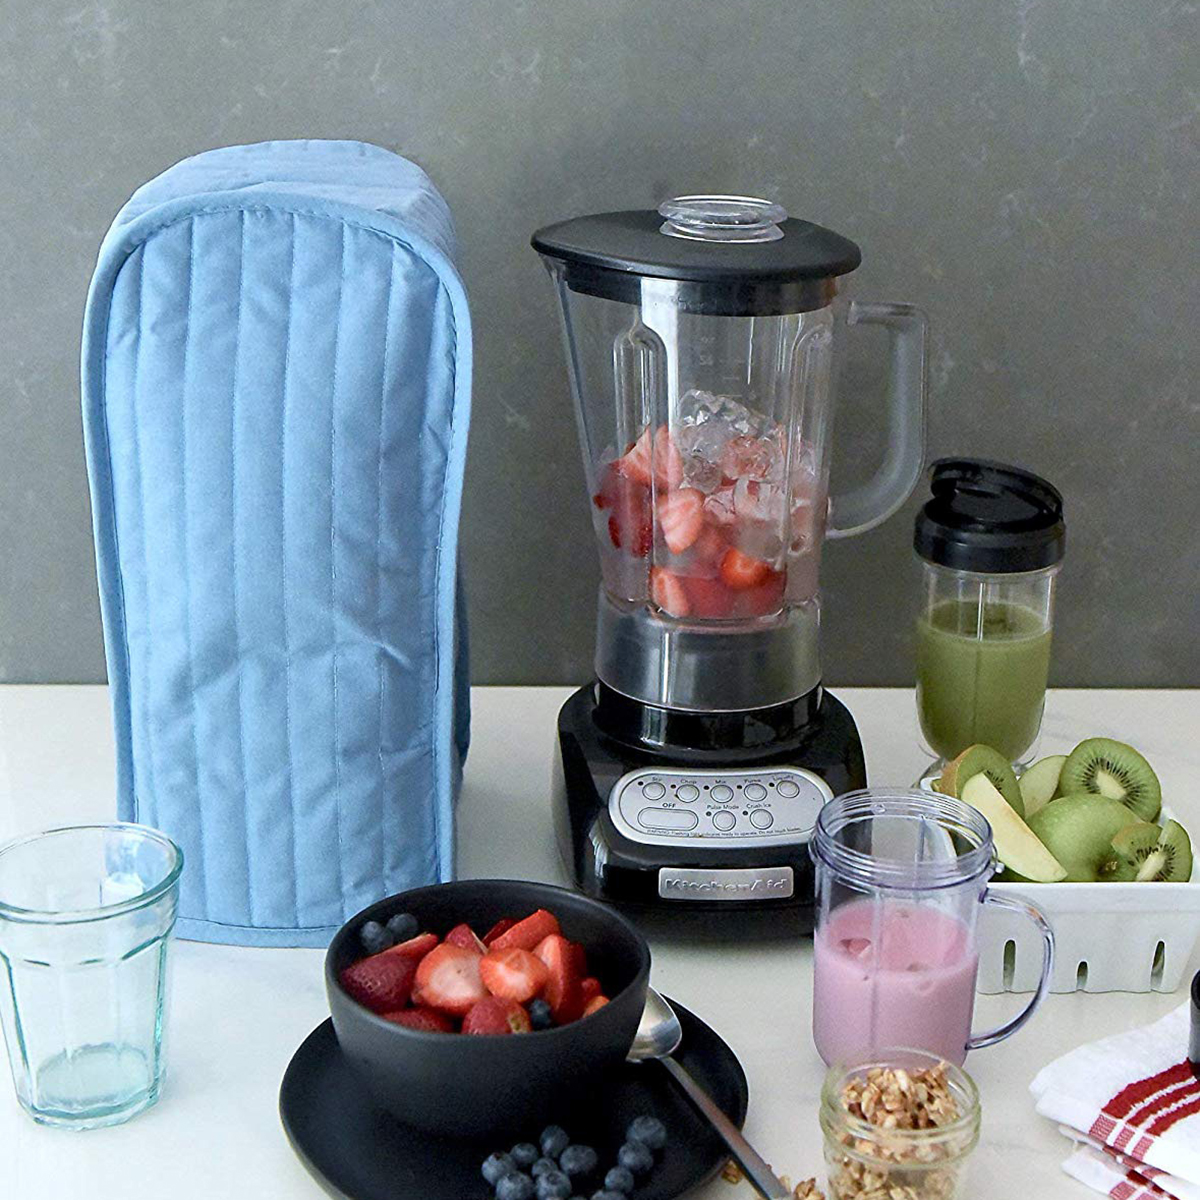 Quilted-Polyester-Kitchen-Blender-Appliance-Cover-Dust-proof-Protection-Case-Bag-1568082-2